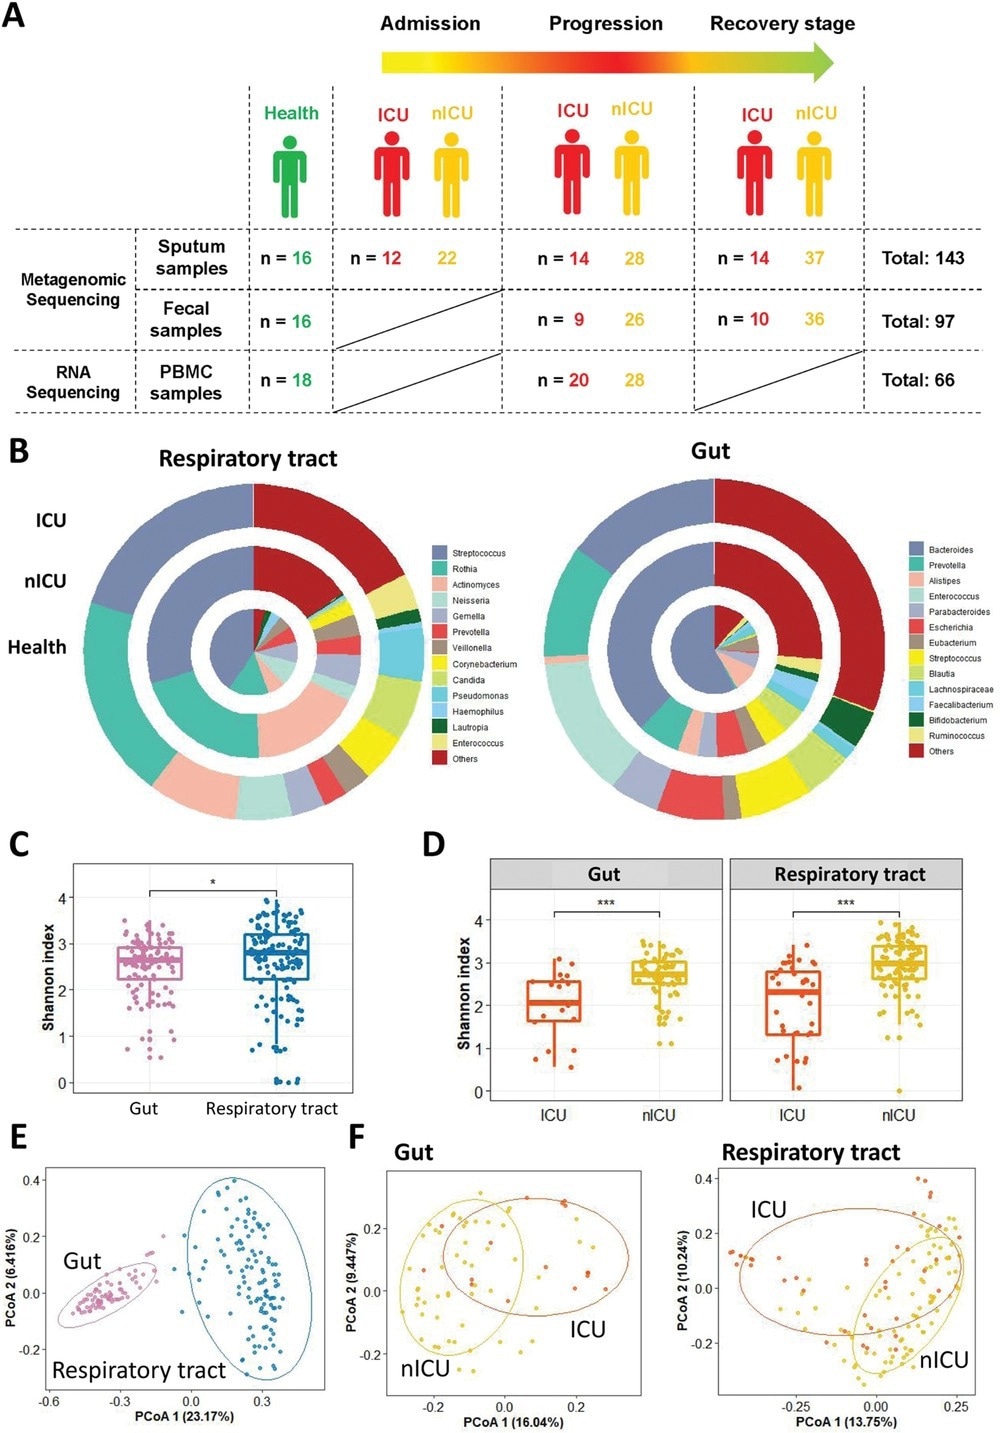 Altered respiratory tract and gut microbial compositions in patients with COVID-19. A) Overview of the experimental design. B) Microbial compositions in the respiratory tract and gut of ICU patients (n = 20), nICU patients (n = 46), and a healthy cohort. C) Comparison of alpha-diversity between respiratory tract and gut microbiota. D) Comparison of alpha-diversity between the microbiota of ICU and nICU patients in the respiratory tract and gut. * p < 0.05, ** p < 0.01, *** p < 0.001. E) First two axes of PCoA (Bray distance) for the beta-diversity of respiratory tract and gut microbiota. F) First two axes of PCoA (Bray distance) for the beta-diversity of ICU and nICU patient microbiota in the respiratory tract and gut. Group differences were tested by pairwise PERMANOVA. ICU: intensive care unit; nICU: non-ICU; PCoA: principal coordinate analysis; PERMANOVA: permutational multivariate analysis of variation; centerline, median; box limits, upper and lower quartiles; error bars, 95% CI.